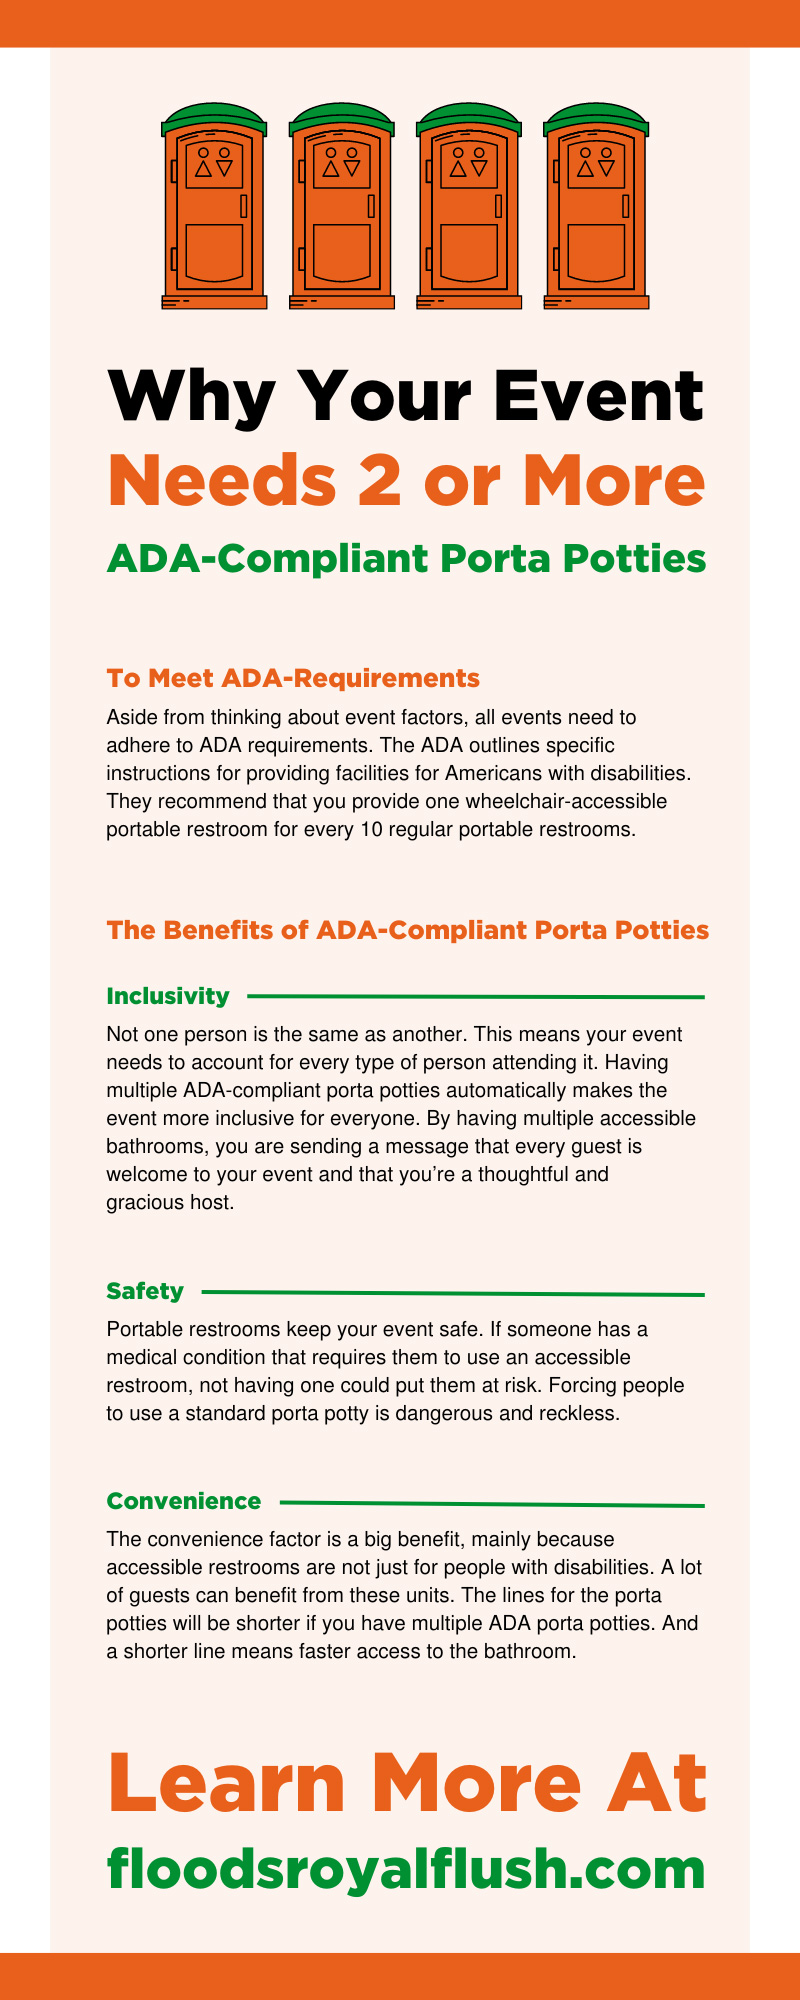 Why Your Event Needs 2 or More ADA-Compliant Porta Potties